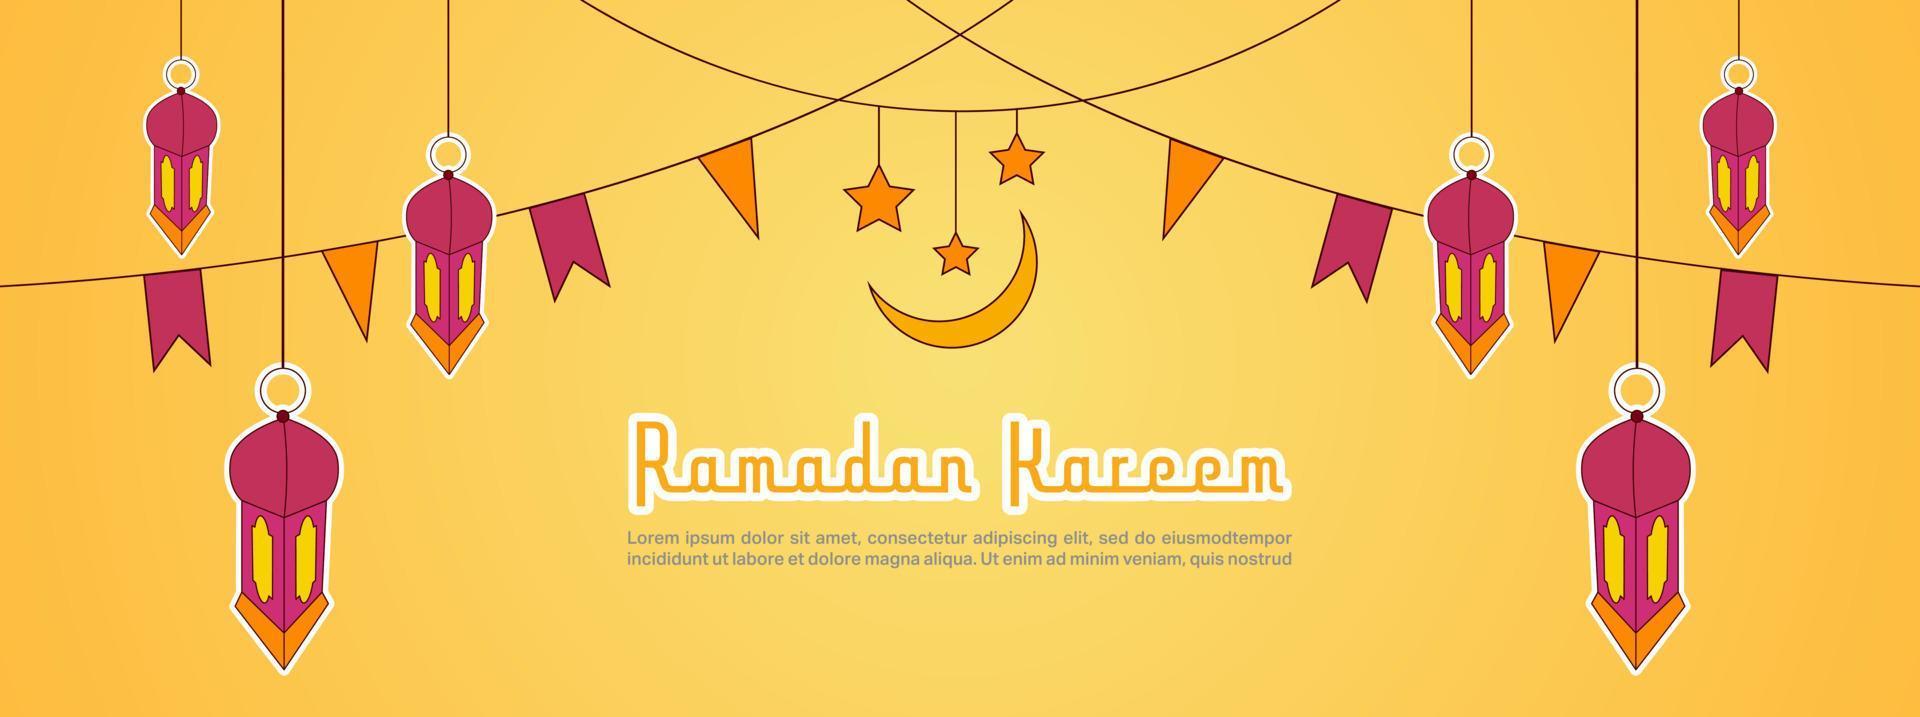 Ramadan kareem horizontal vector banner. Muslim religion holy month flat banner copy space vector illustration. Banner with lamps decoration.